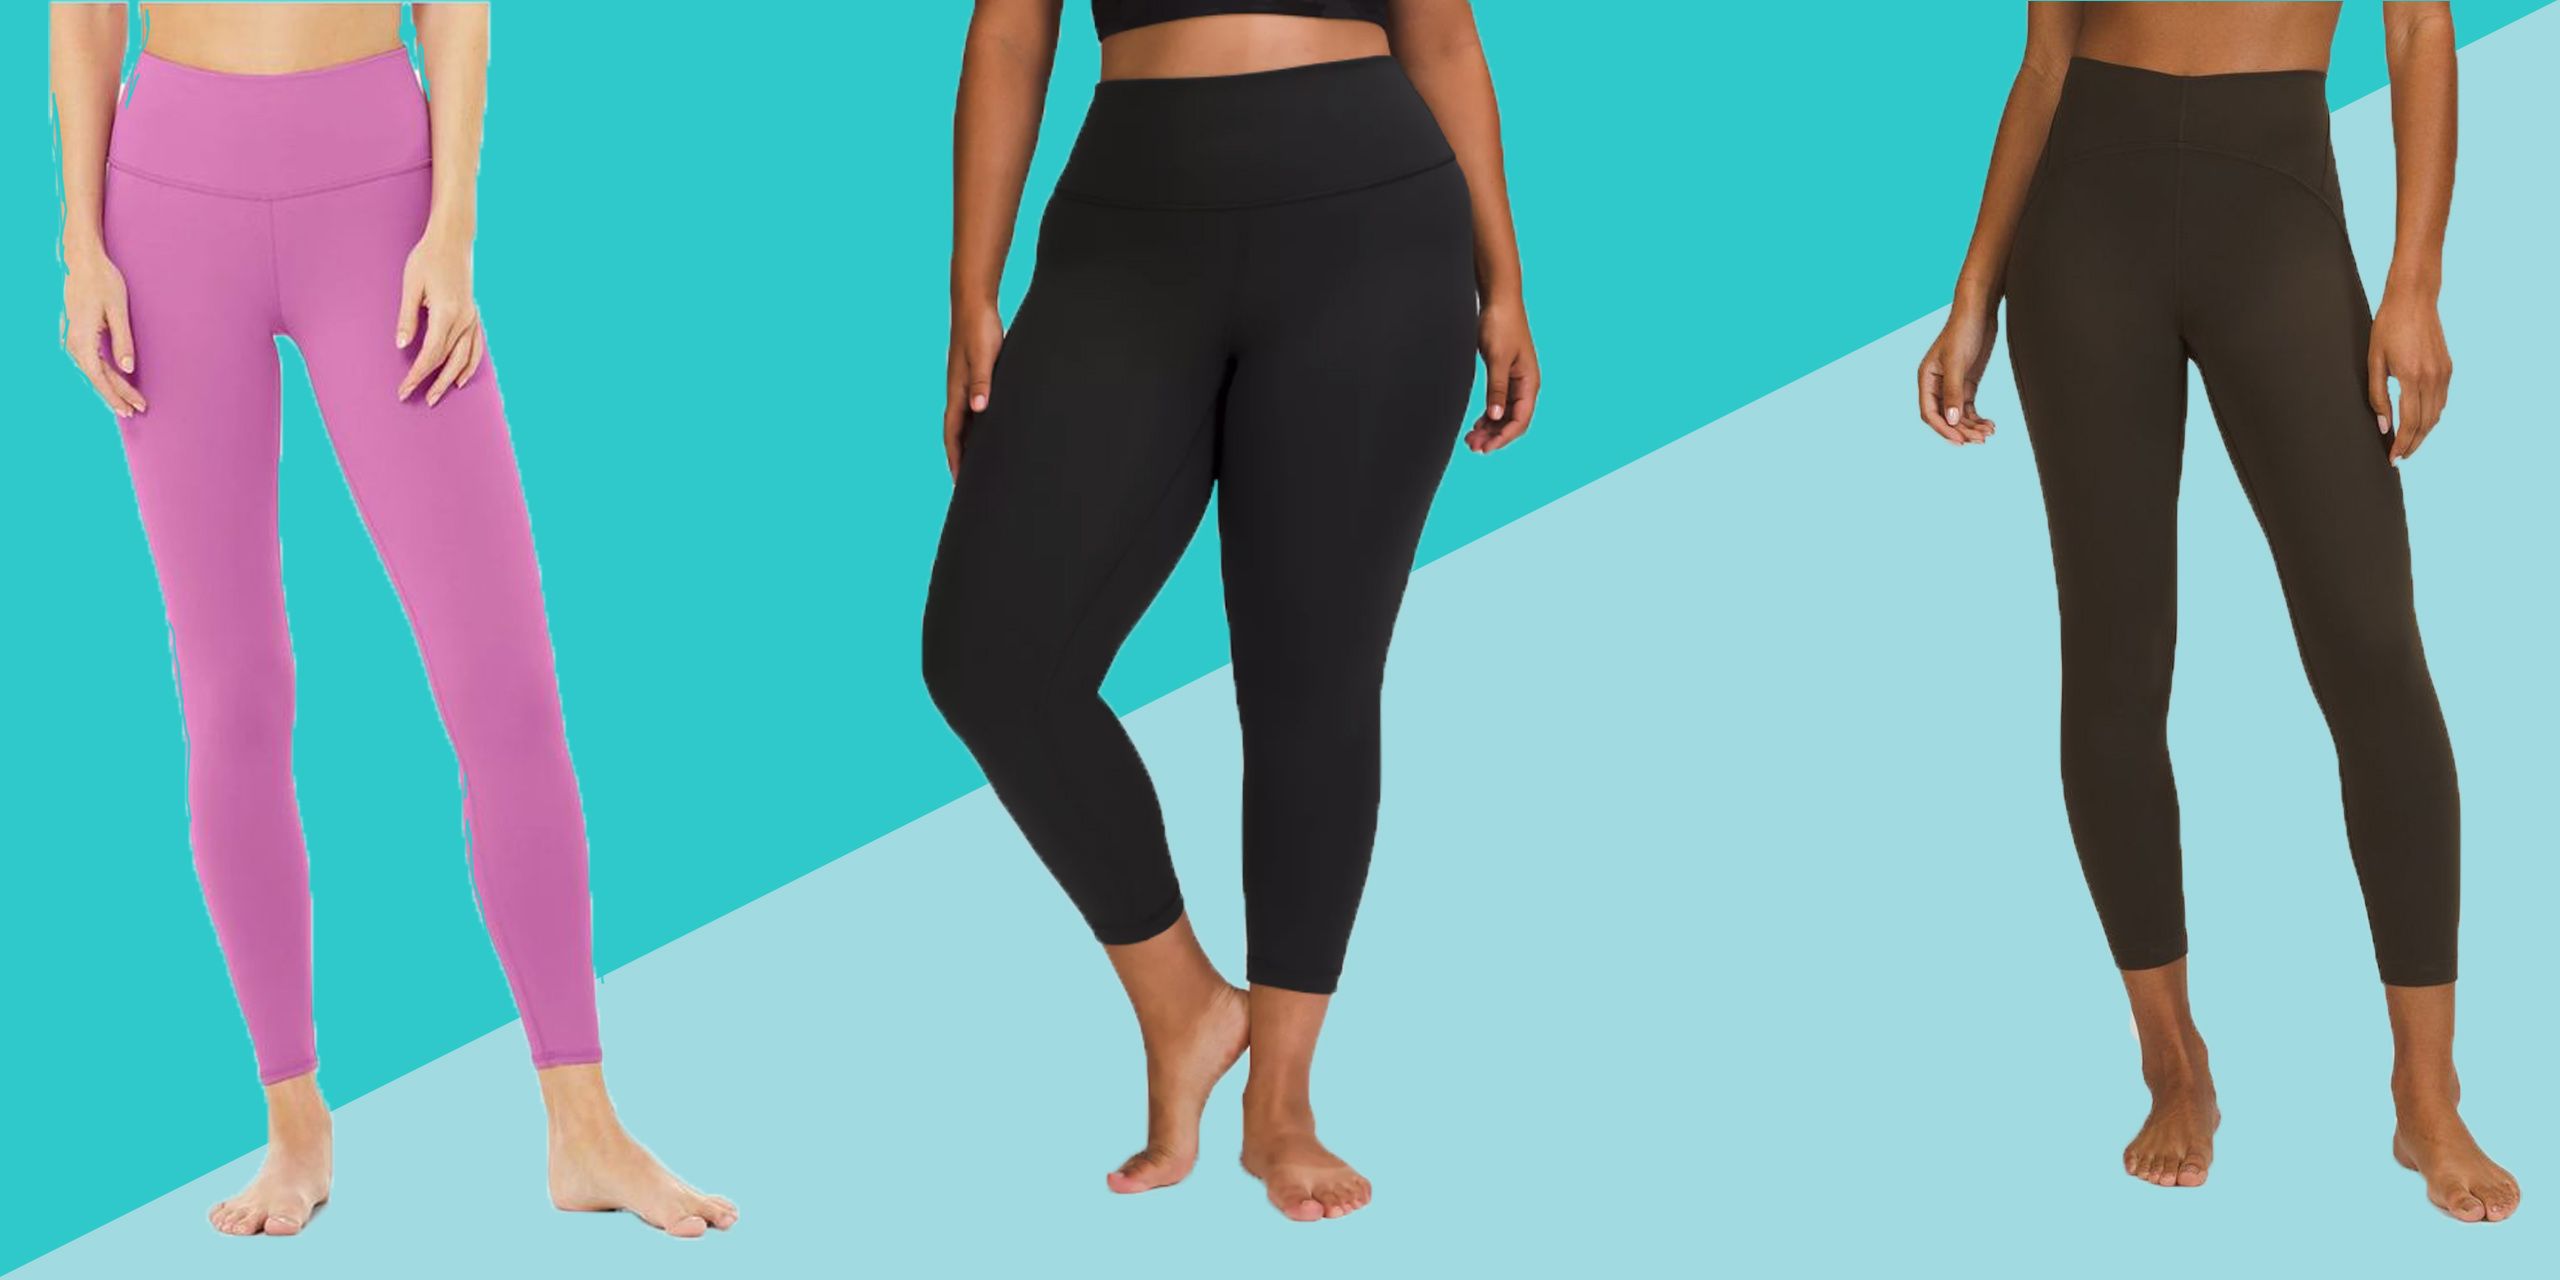 10 Pairs Of Inclusively Sized Workout Leggings That Reviewers Can